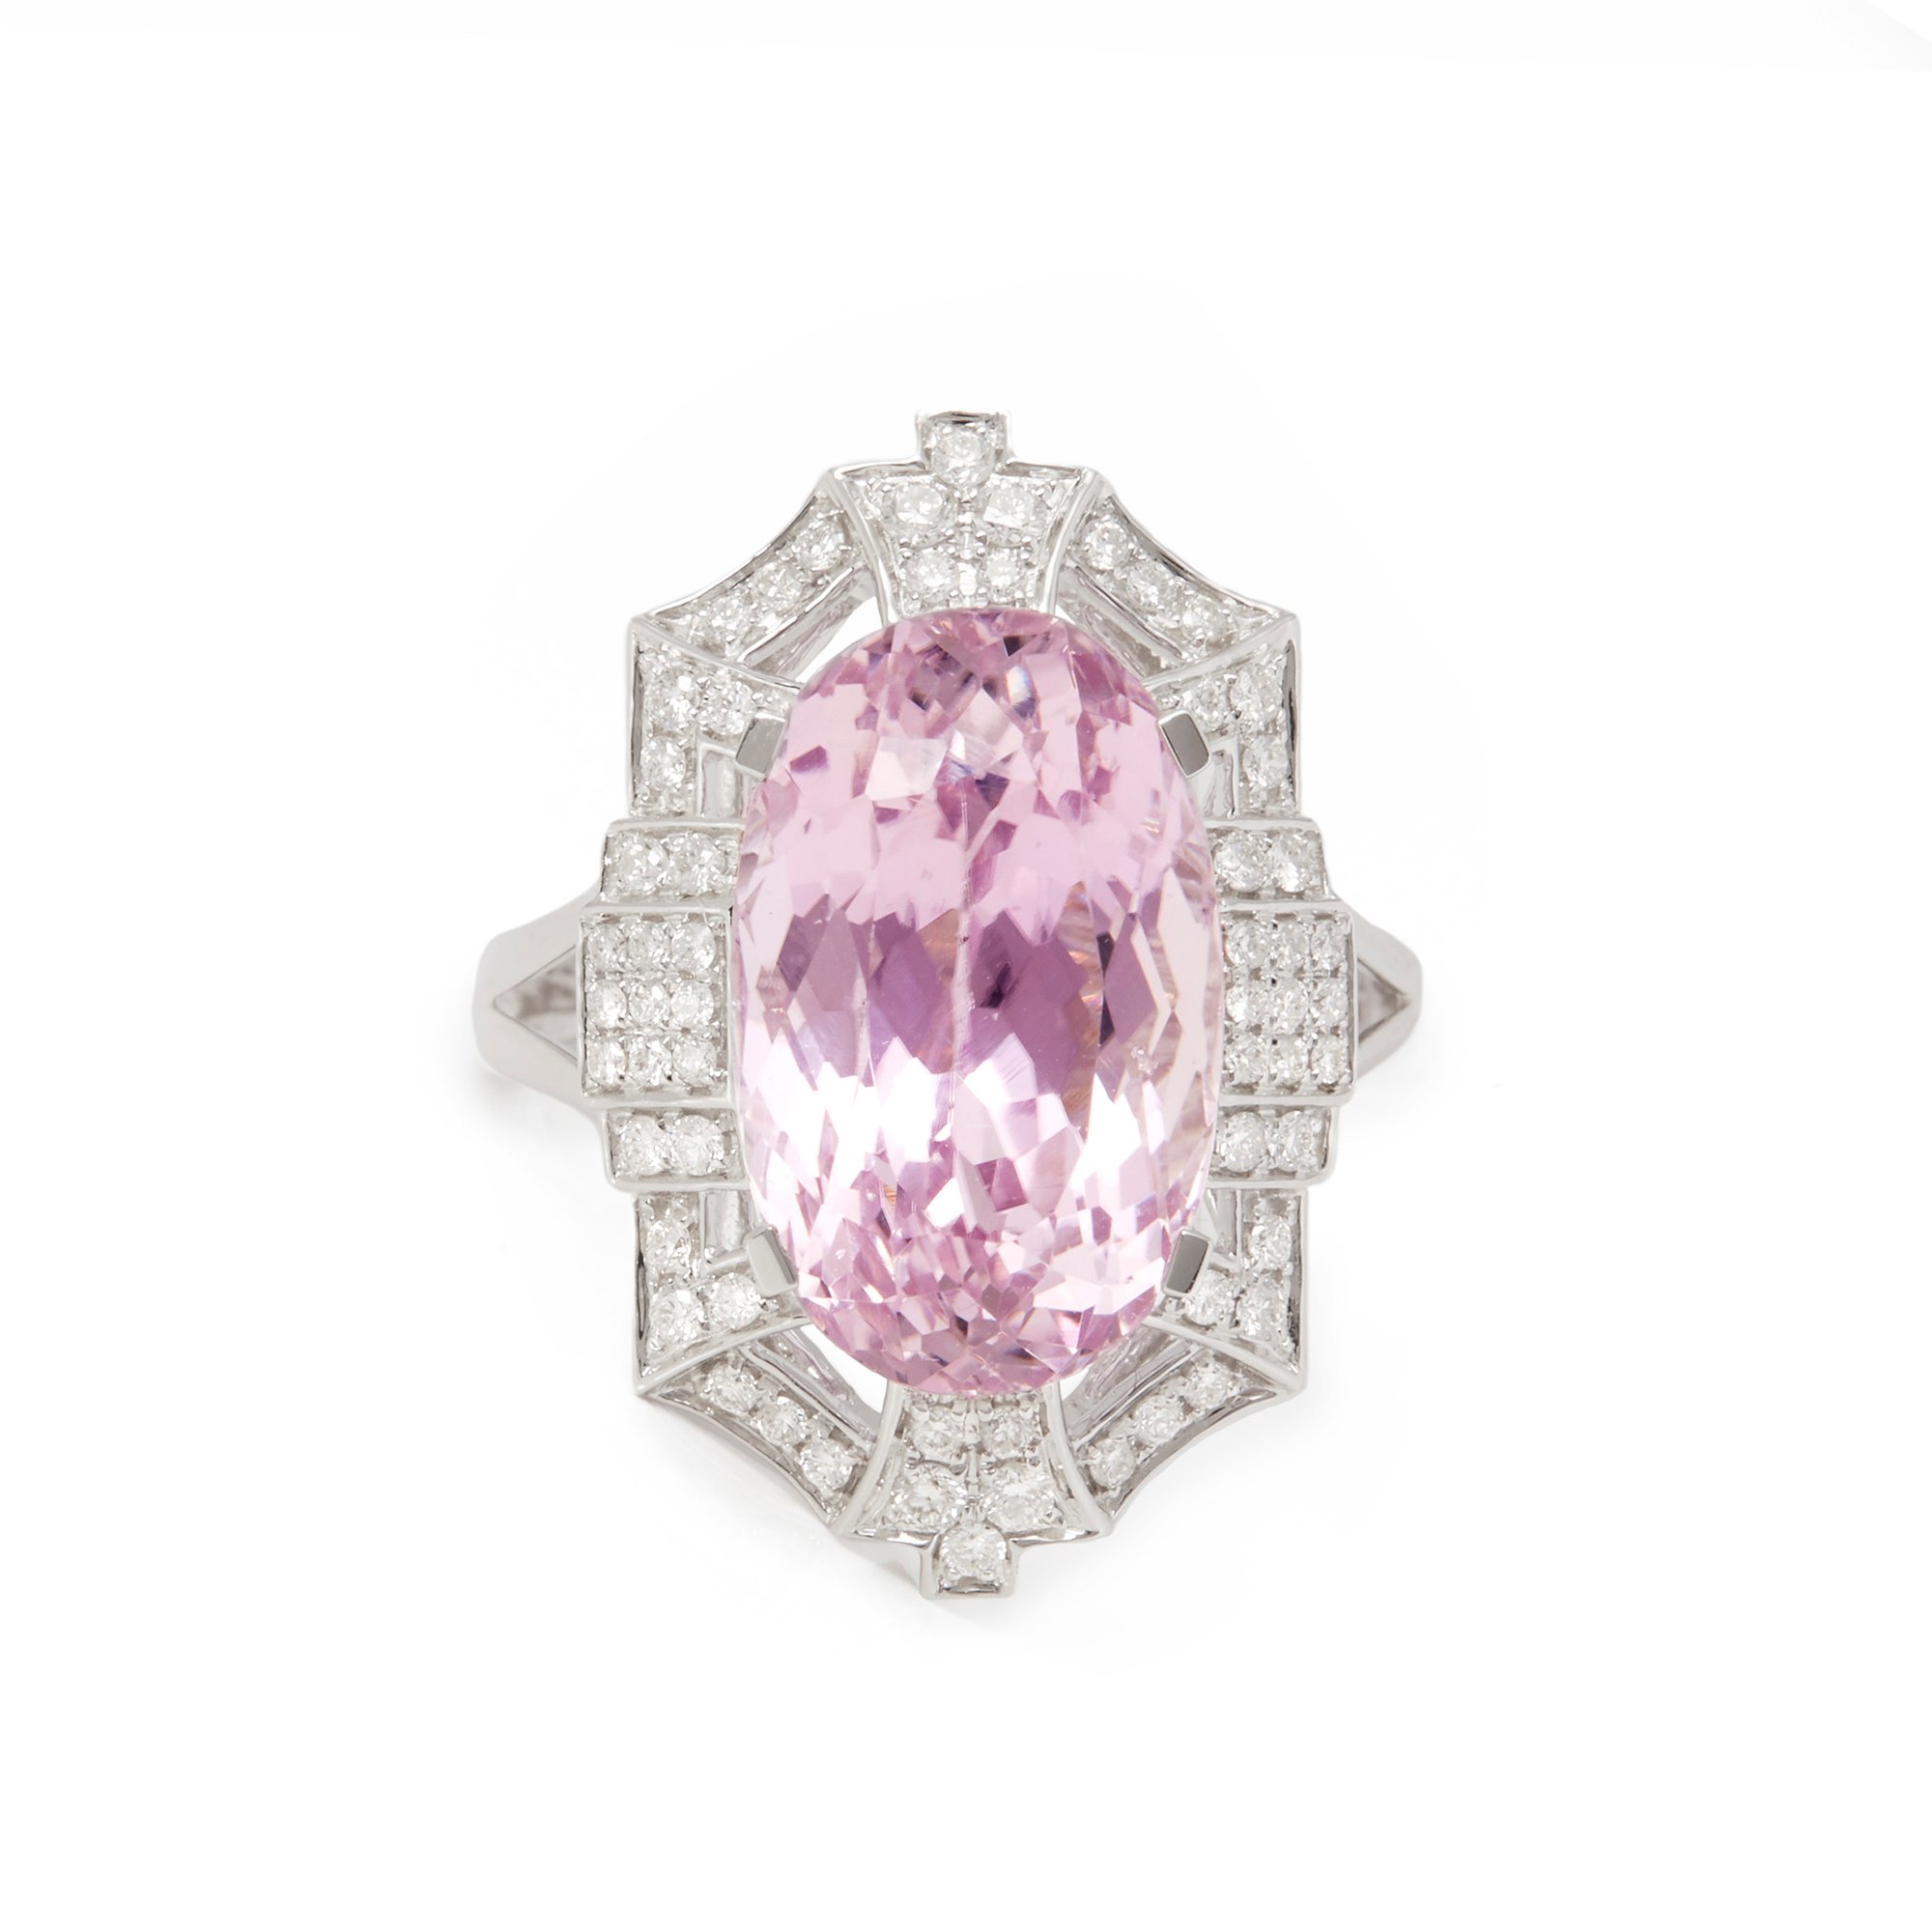 David Jerome Certified 9.91ct Untreated Oval Cut Kunzite and Diamond 18ct Gold Ring